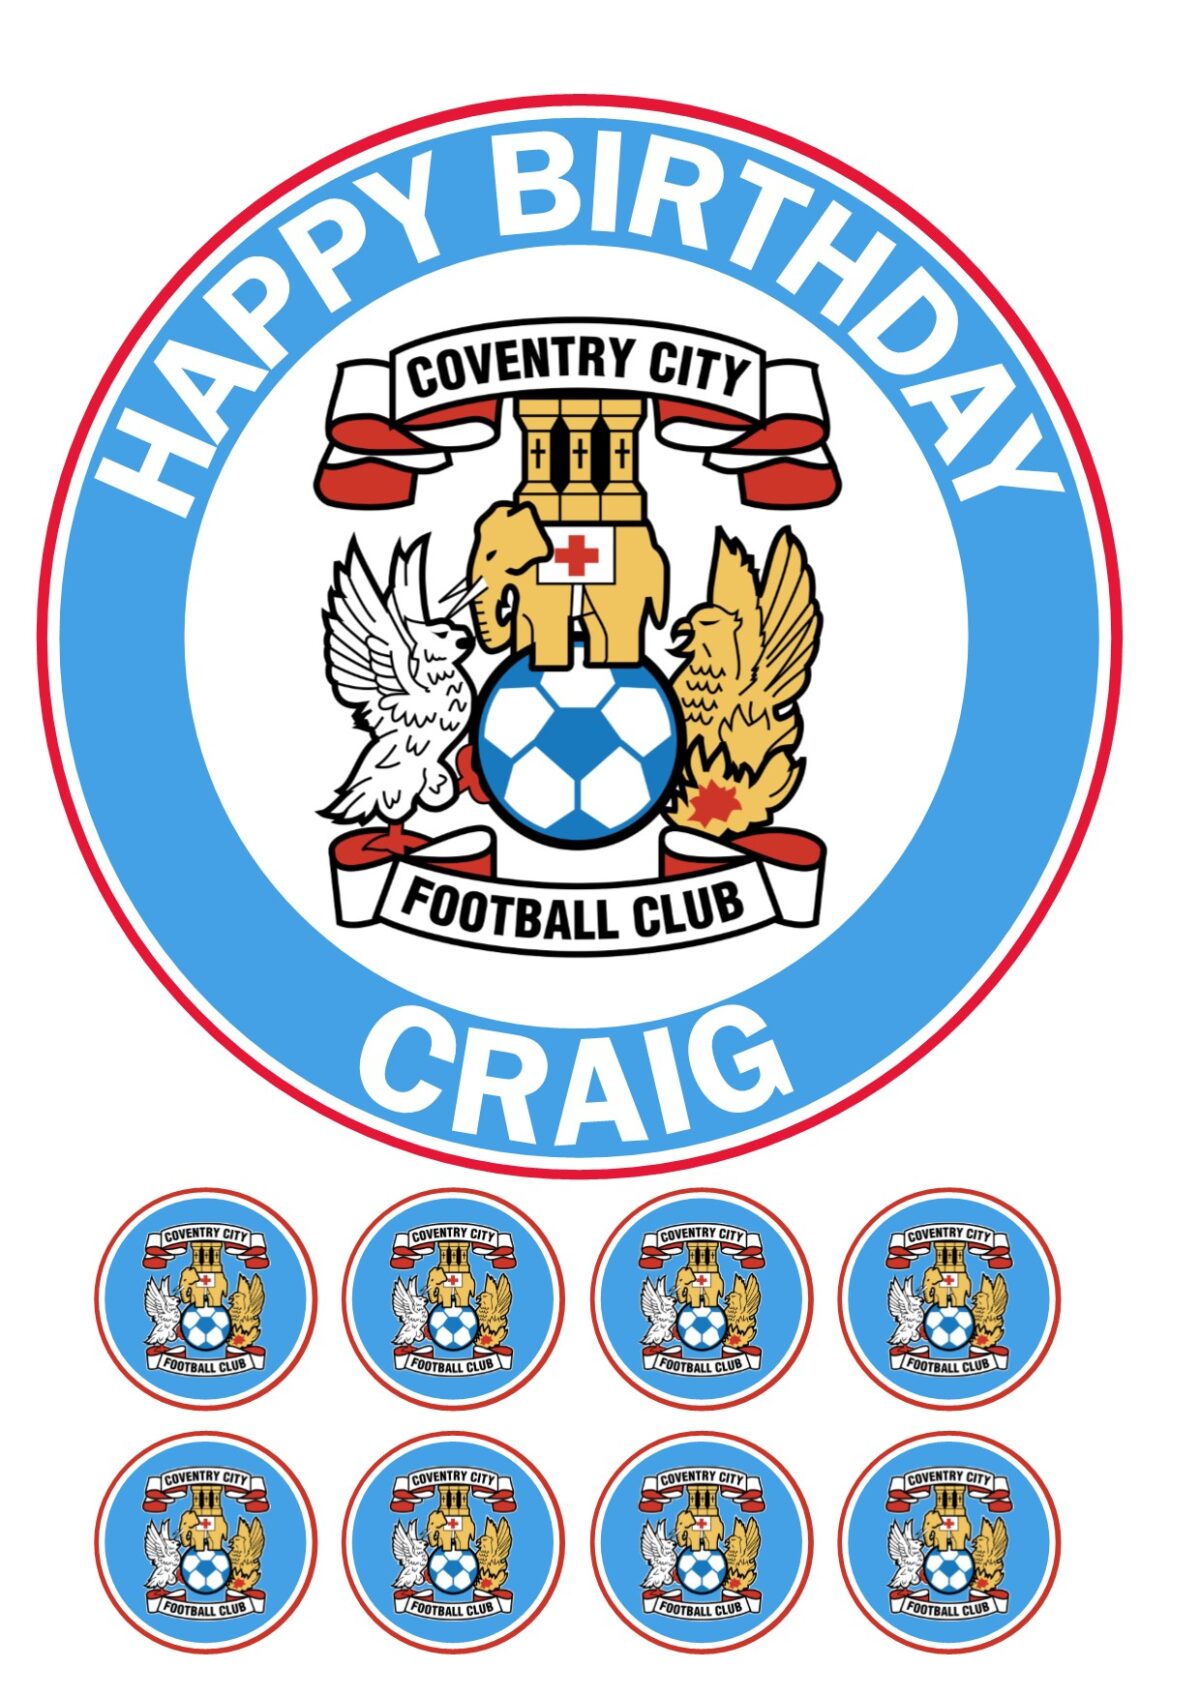 coventry fc ICING BIRTHDAY CAKE TOPPER